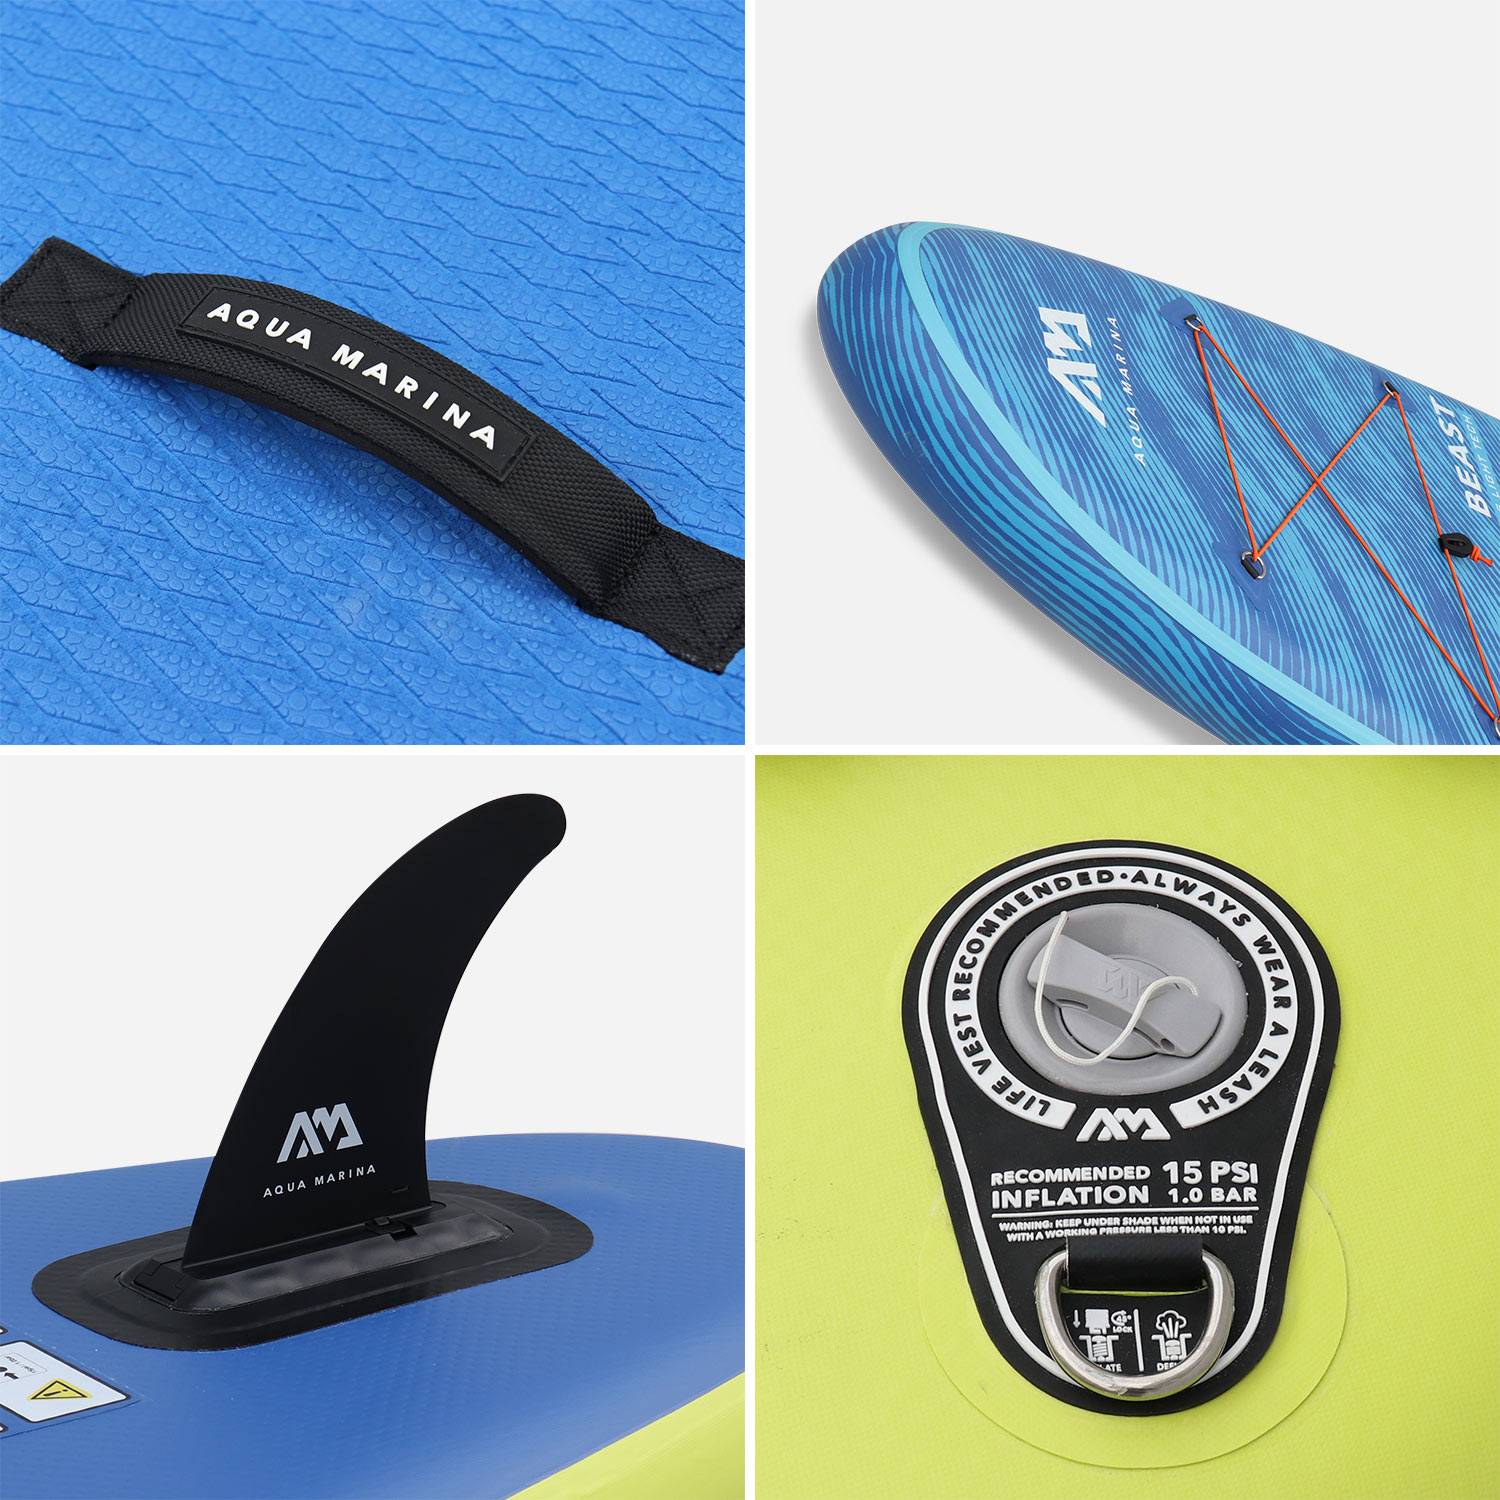 Inflatable Stand Up Paddle Board - Beast 10'6 "- 15cm thick - Inflatable stand up paddle pack (SUP) with high pressure pump, paddle, leash and storage bag included Photo6